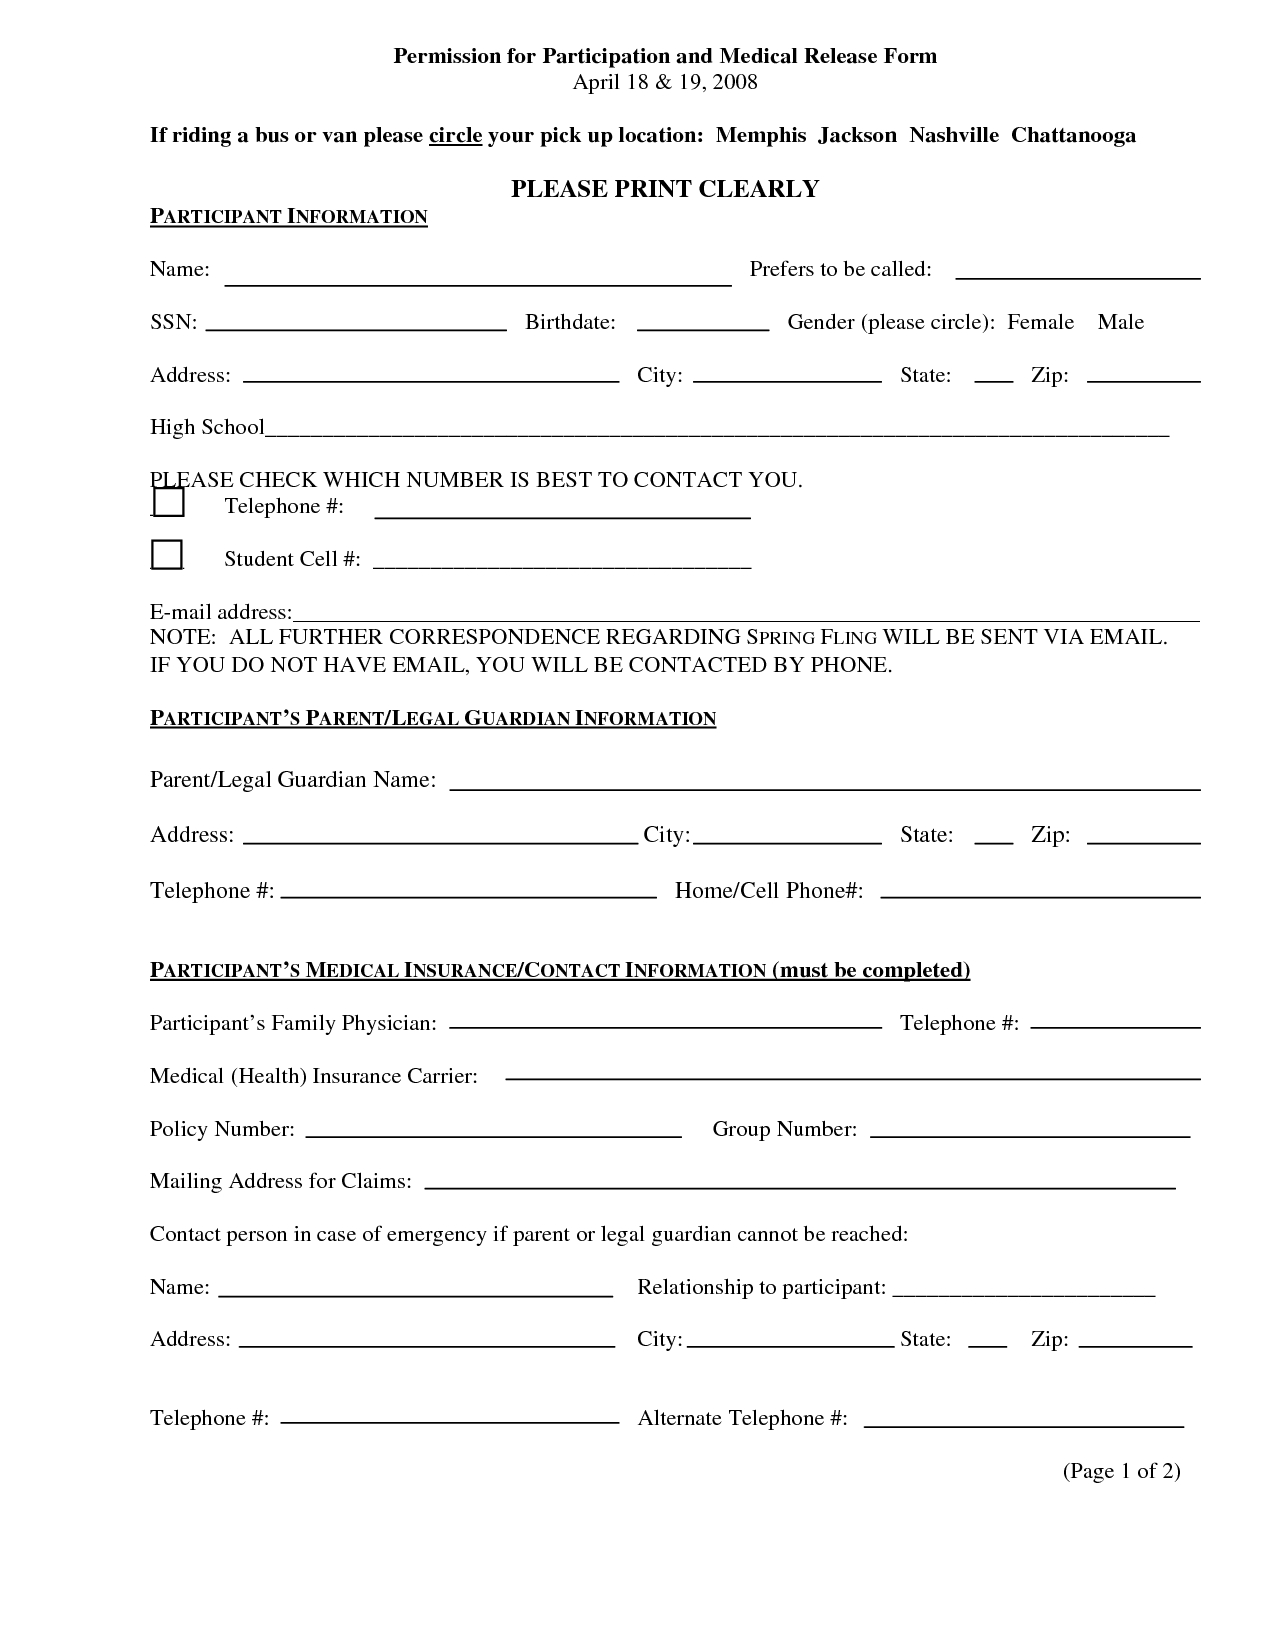 Pingiovanni Mastrocola On Pain No Gain | Incident Report Form - Free Printable Medical Forms Kit